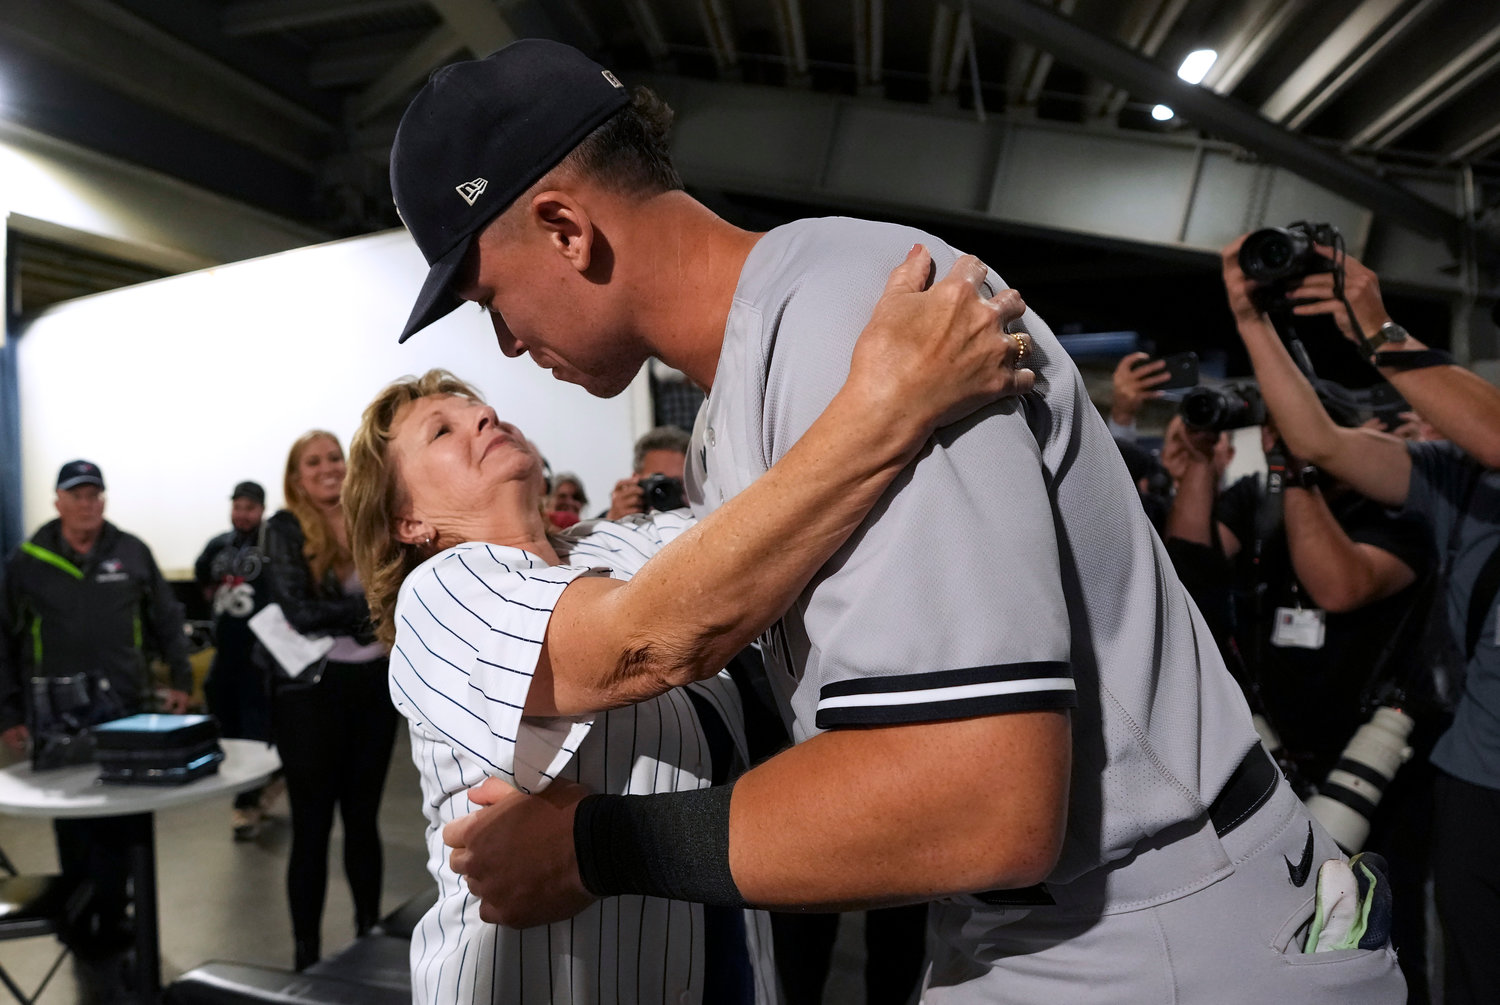 New York Yankees slugger Aaron Judge hugs his mother, Patty Judge, after the team’s game against the Toronto Blue Jays on Wednesday night in Toronto. Judge hit his 61st home run of the season.